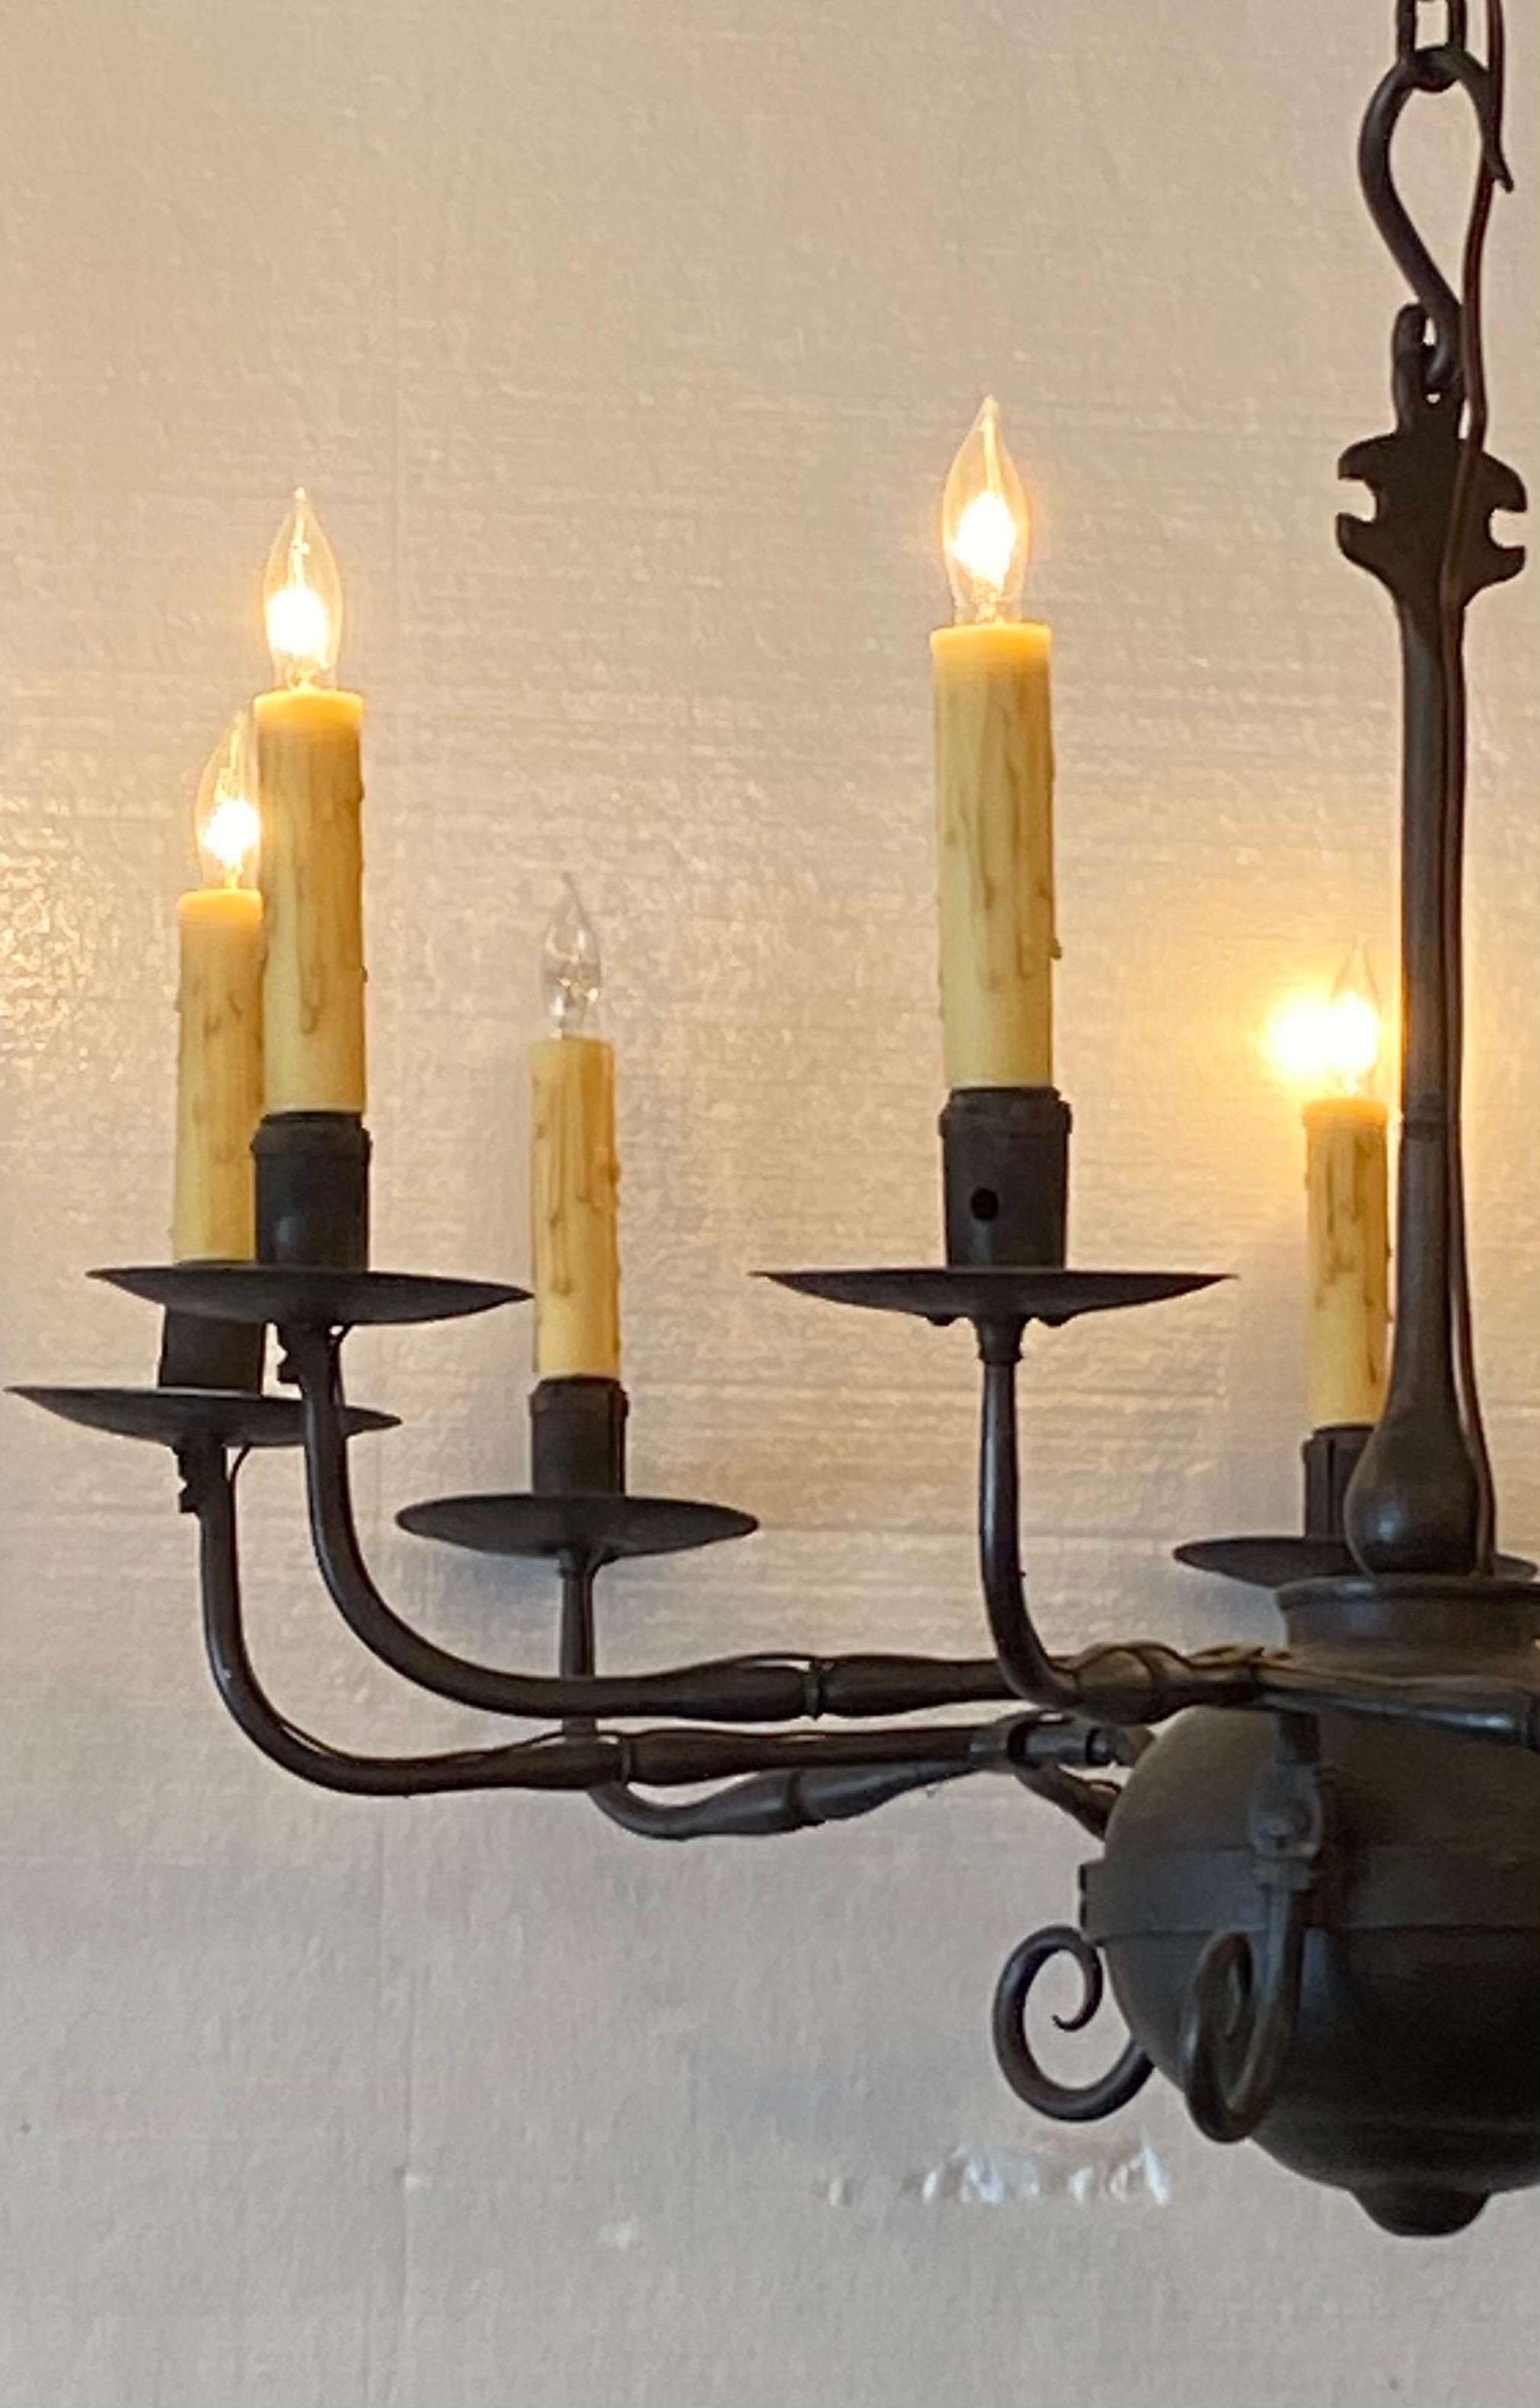 South American Black 19th-Centuey Iron Chandelier